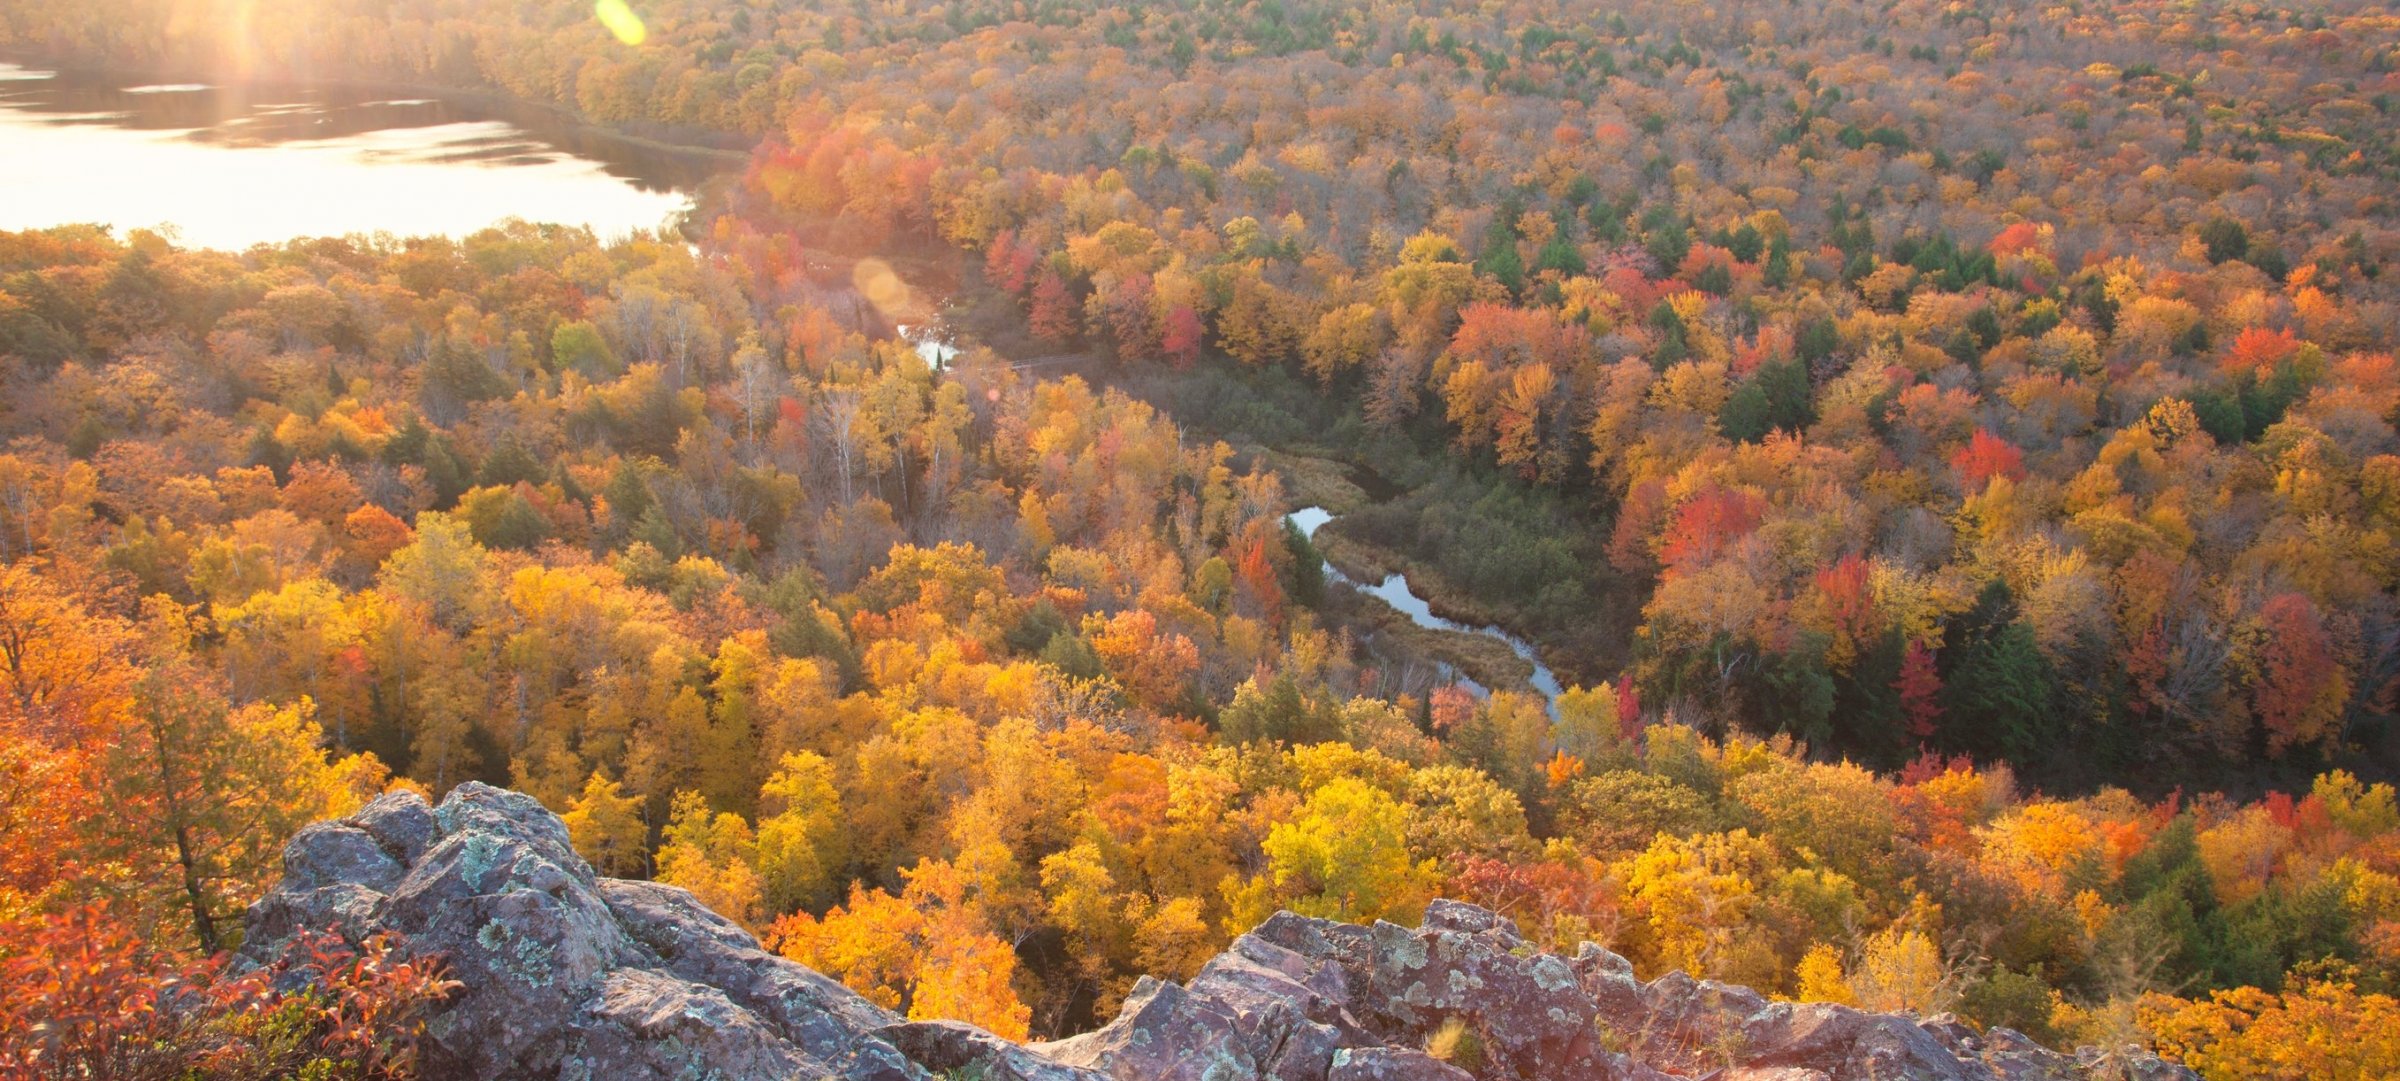 Aerial view of a colorful forest at sunset.